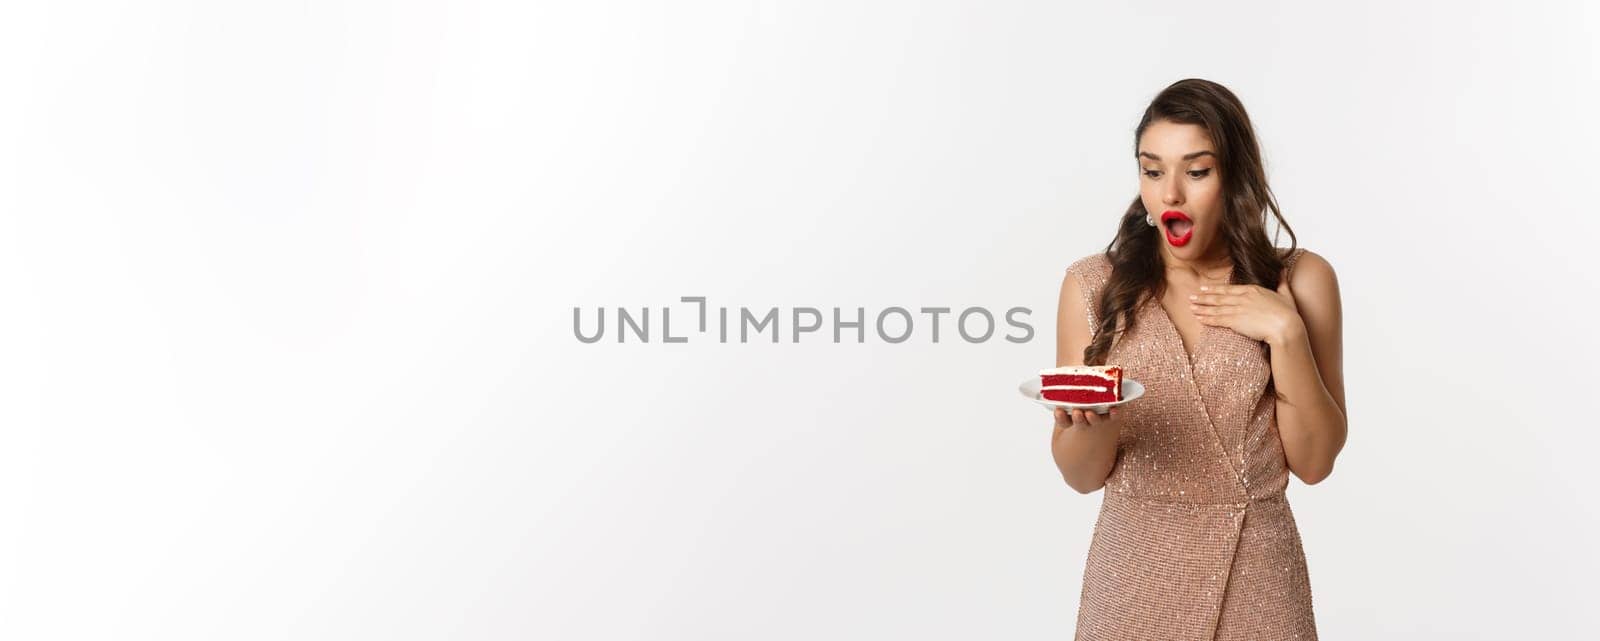 Party and celebration concept. Image of amazed slim female model in luxury dress, looking at piece of cake excited, standing over white background.